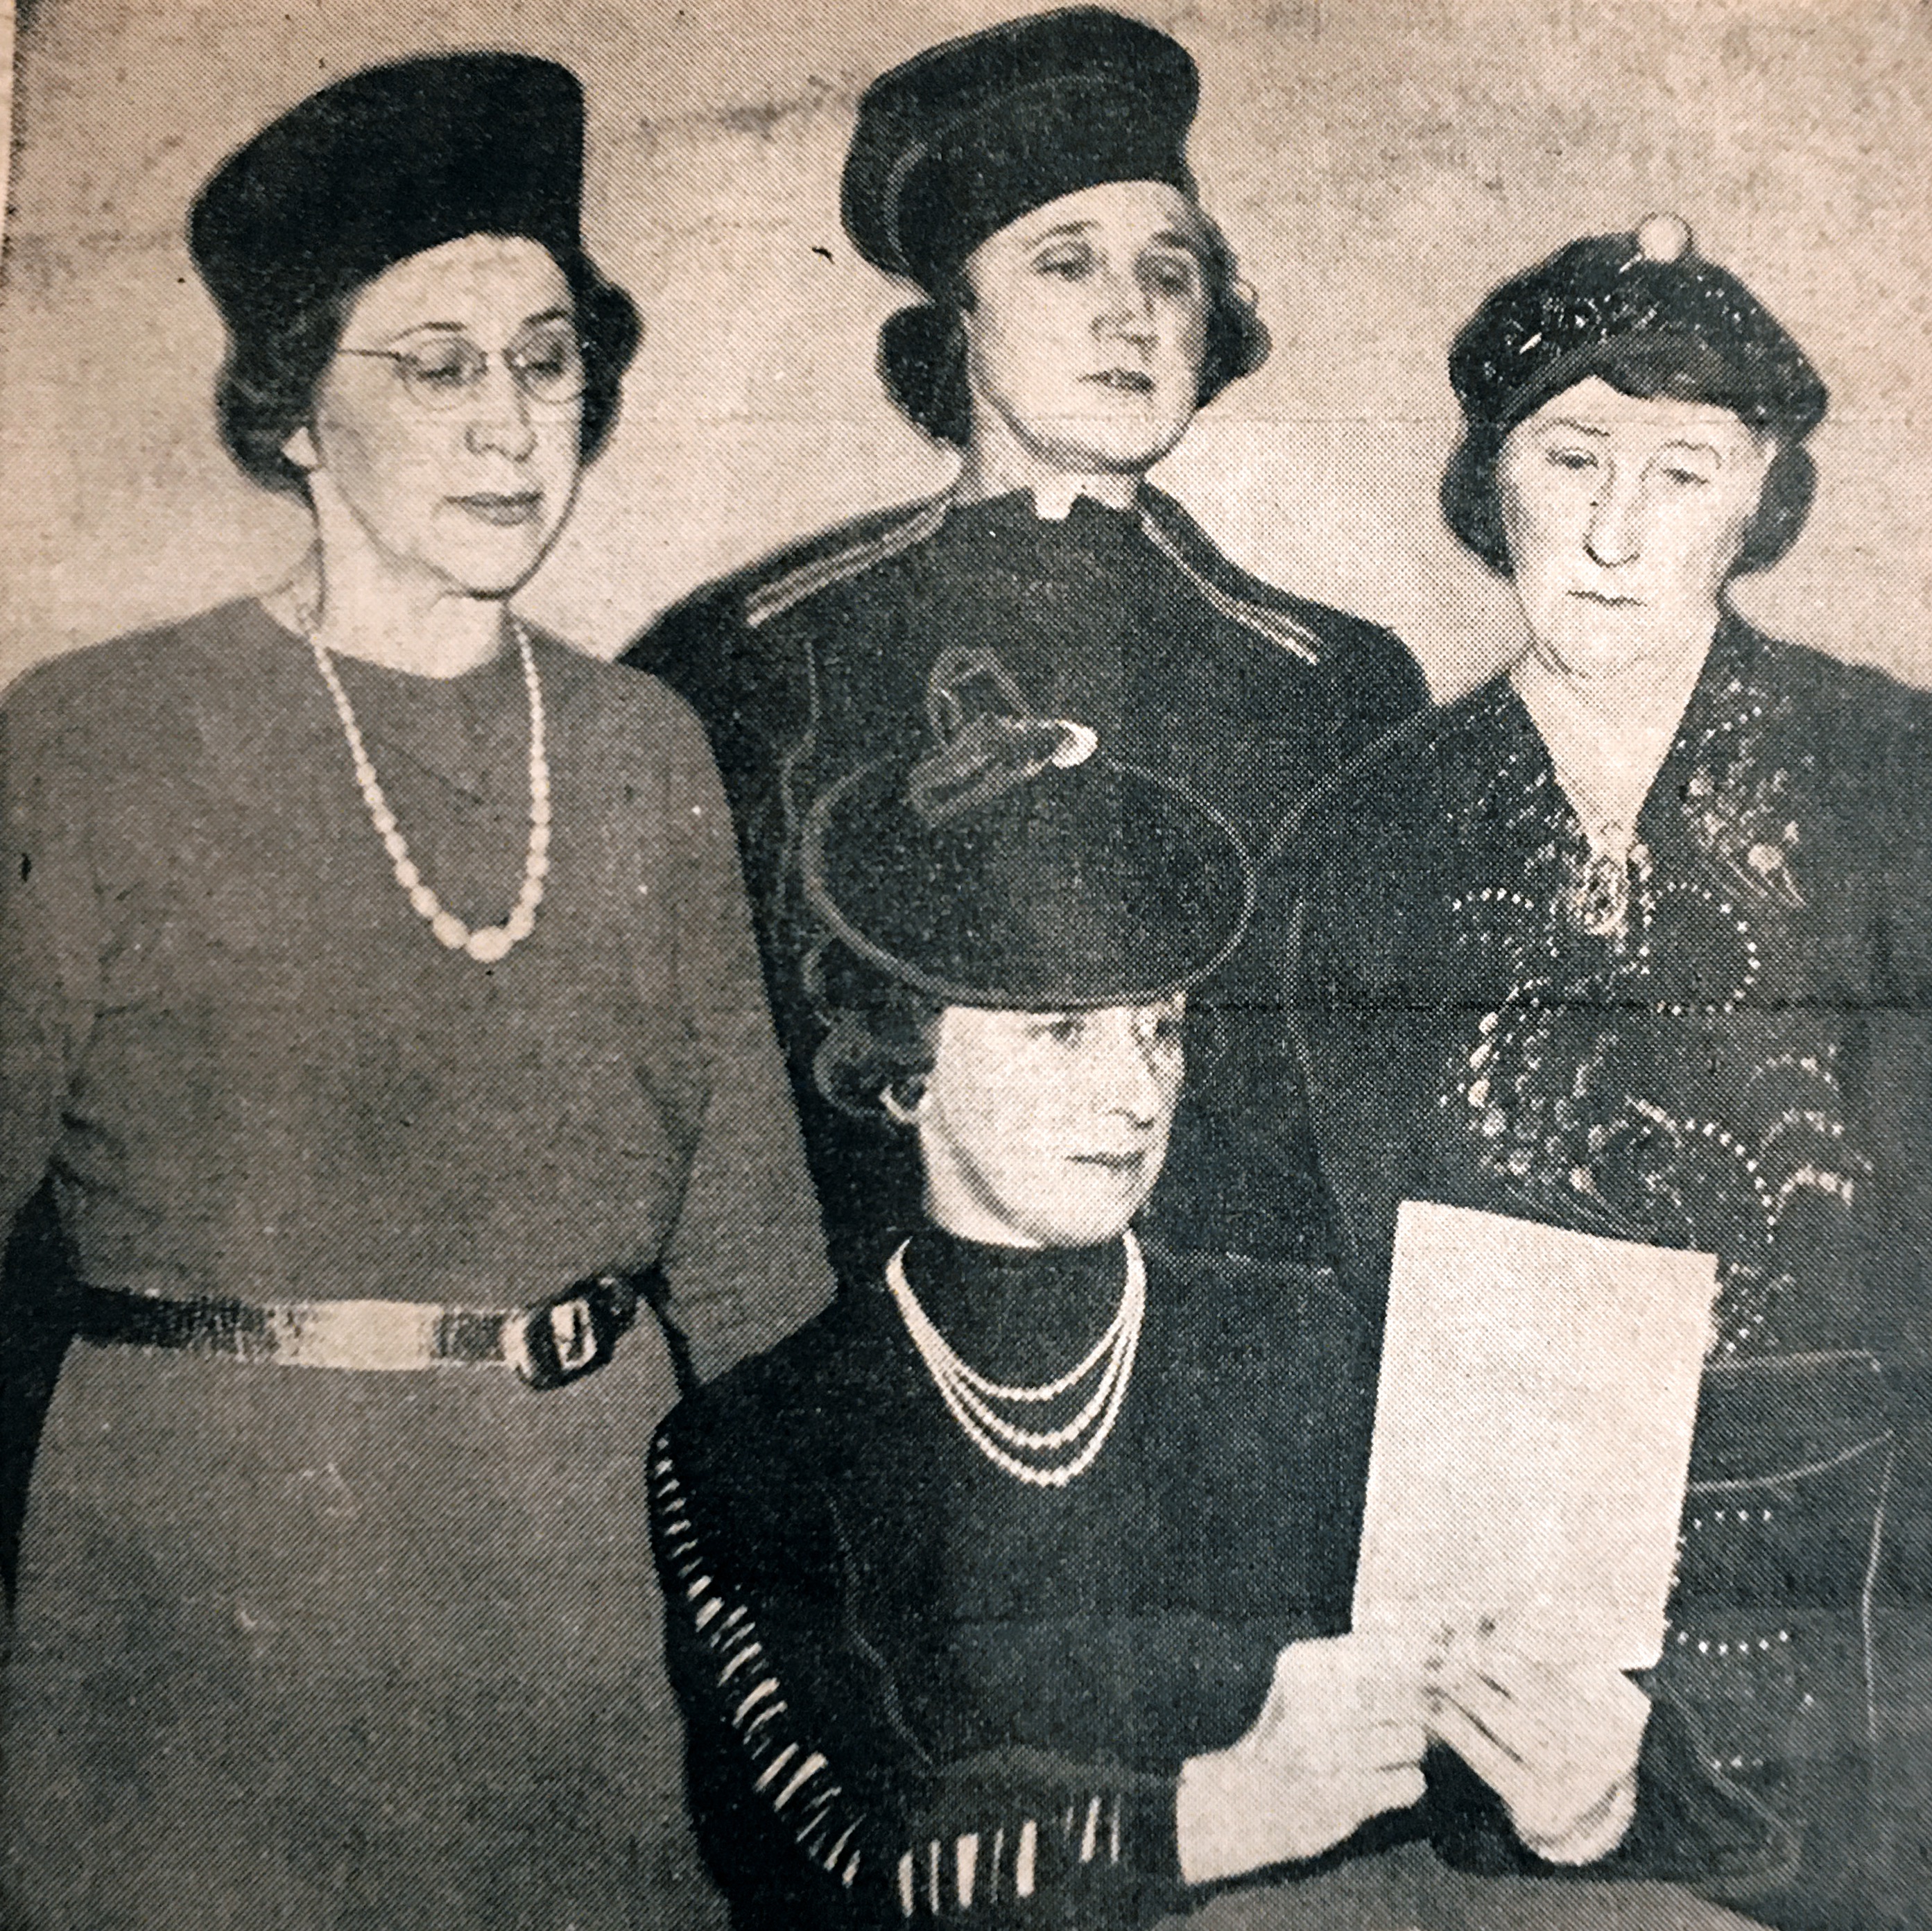 Newspaper photo of Gertrude: “In Charge of Card Party”. “Turn Verein Women’s Auxiliary will have a benefit card party on the afternoon and evening of Feb. 20 at Turn Hall.  Mrs. William Winter (Gertrude), seated in the picture, is general chairman, assisted by Mrs. George Winter, Mrs. John Hecker, and Mrs. John Ehegartner, from left to right. There will be door and table prizes.”  The Syracuse Journal.